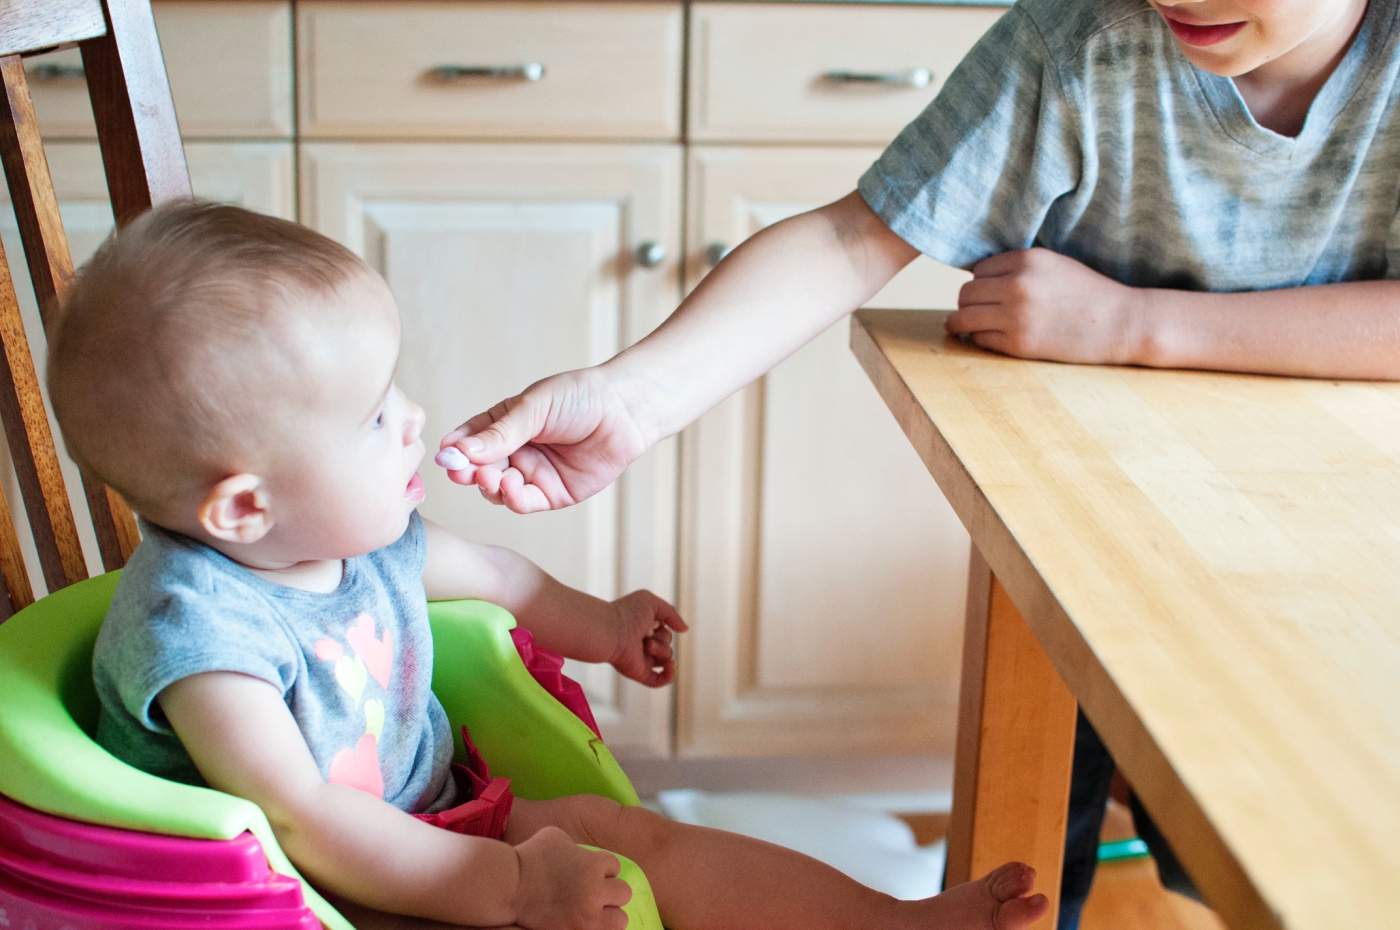 Should You Make Your Own Baby Food?